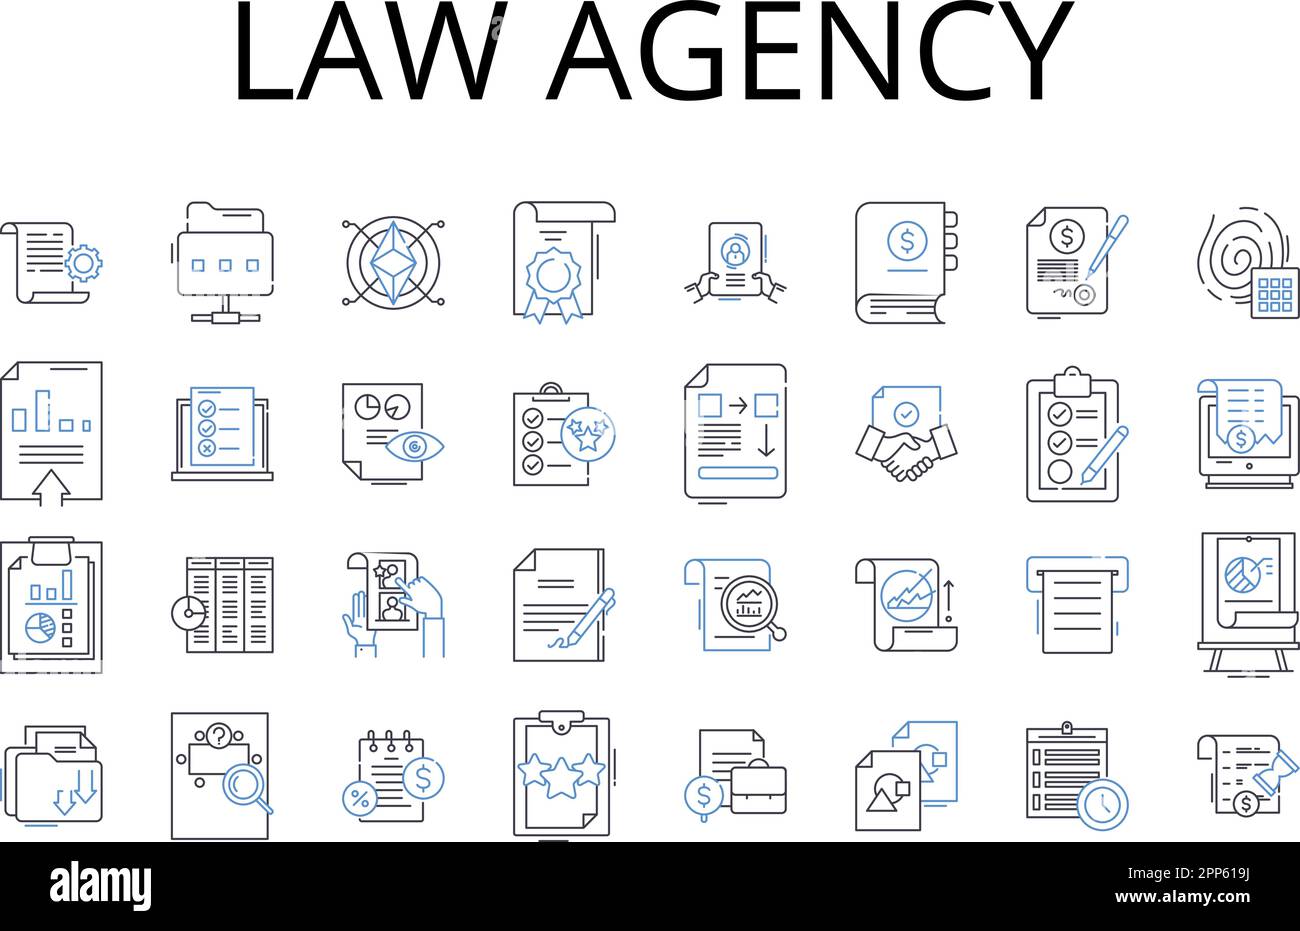 law agency line icons collection. Legal firm, Judicial bureau, Court company, Attorney association, Law house, Justice organization, Advocate agency Stock Vector